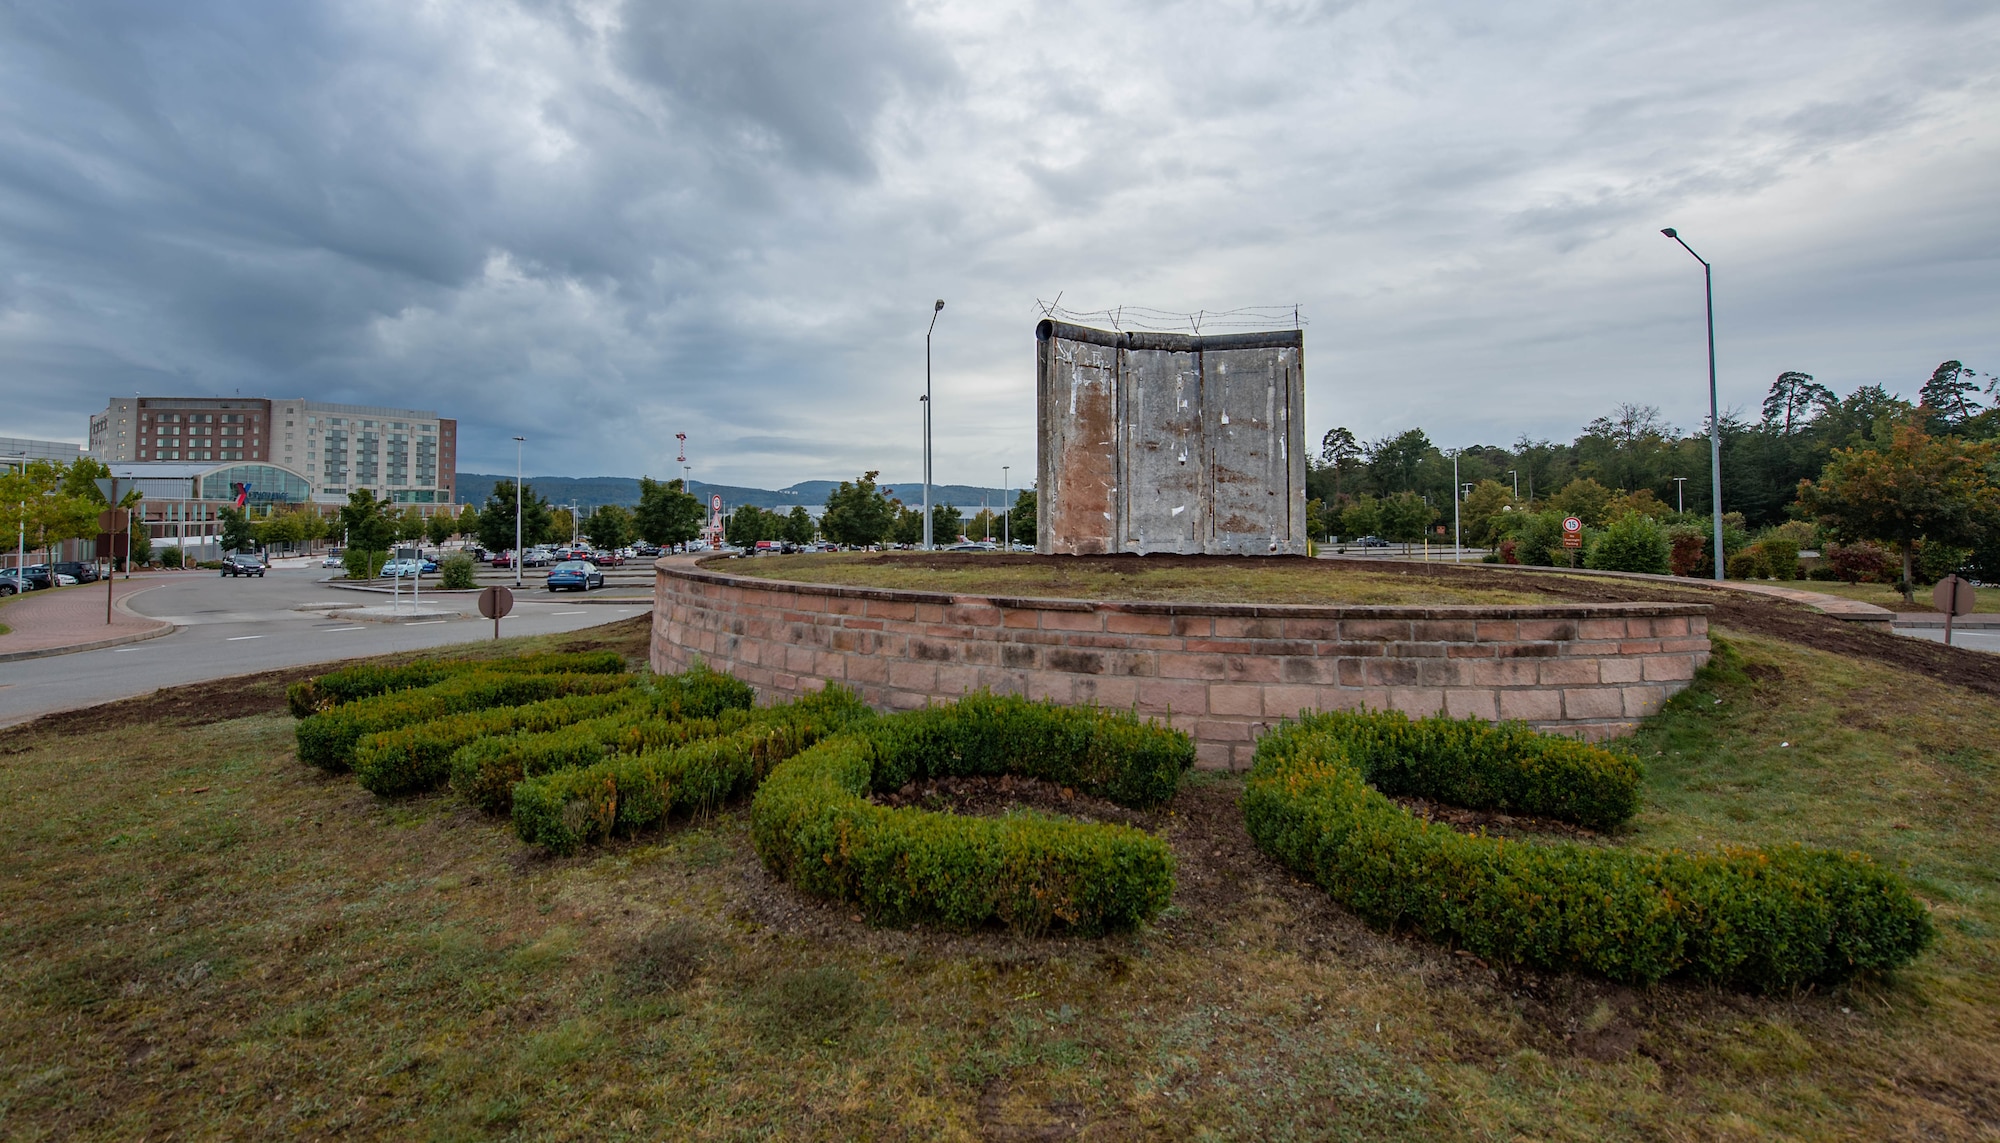 A fragment of the Berlin Wall was placed near the Kaiserslautern Military Community Center as a memorial at Ramstein Air Base, Germany, Oct. 1, 2021.